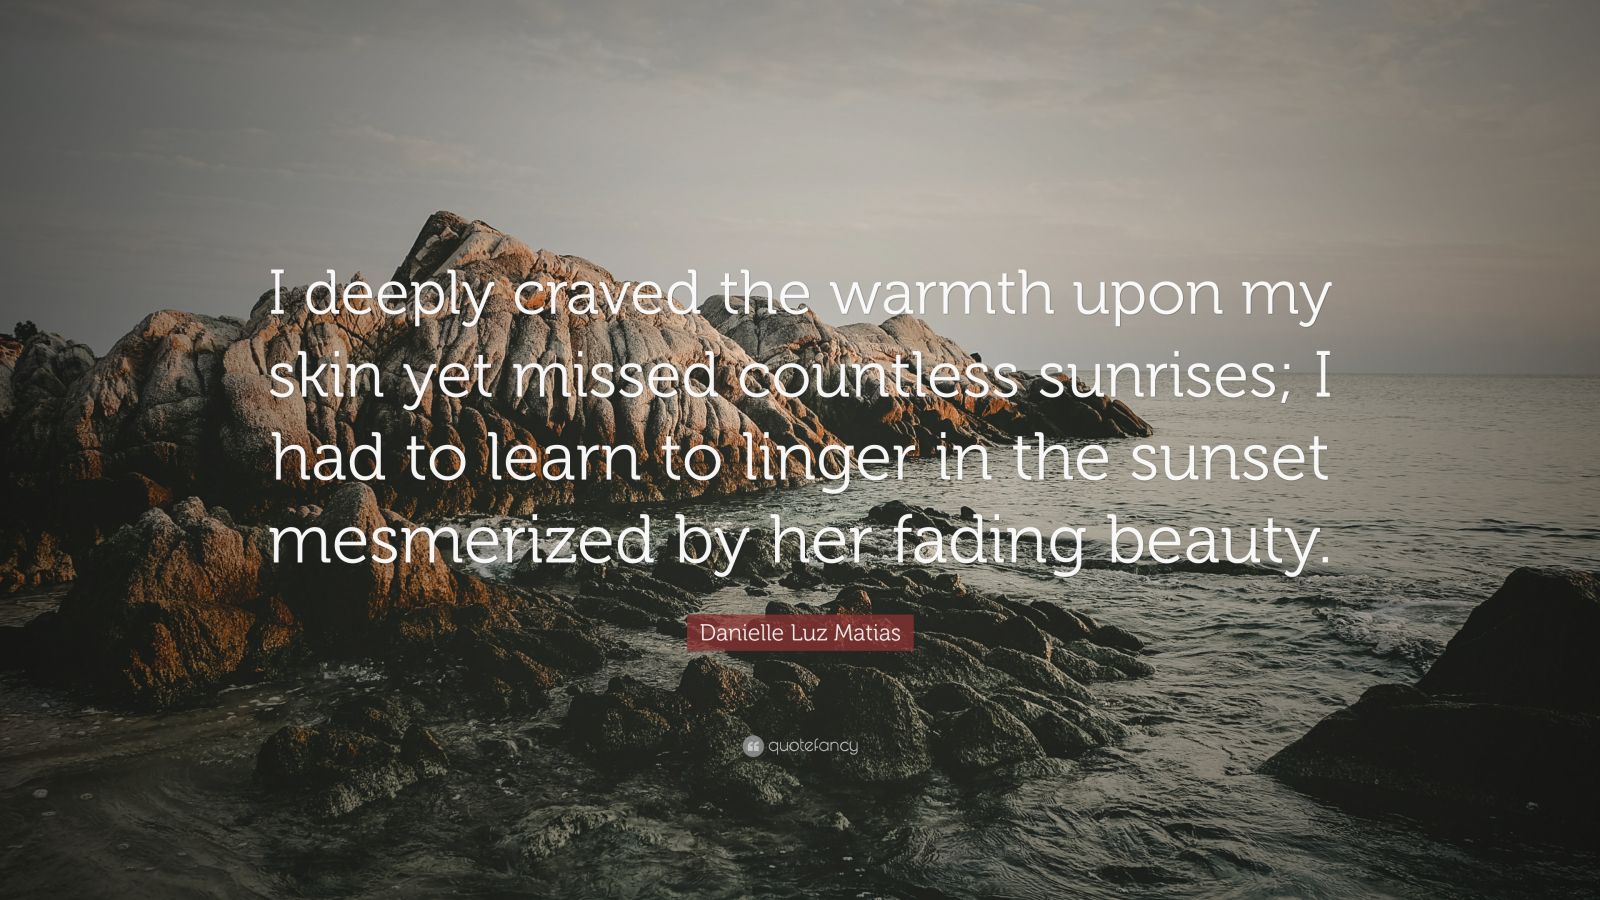 Danielle Luz Matias Quote: “I deeply craved the warmth upon my skin yet  missed countless sunrises; I had to learn to linger in the sunset  mesmerized”